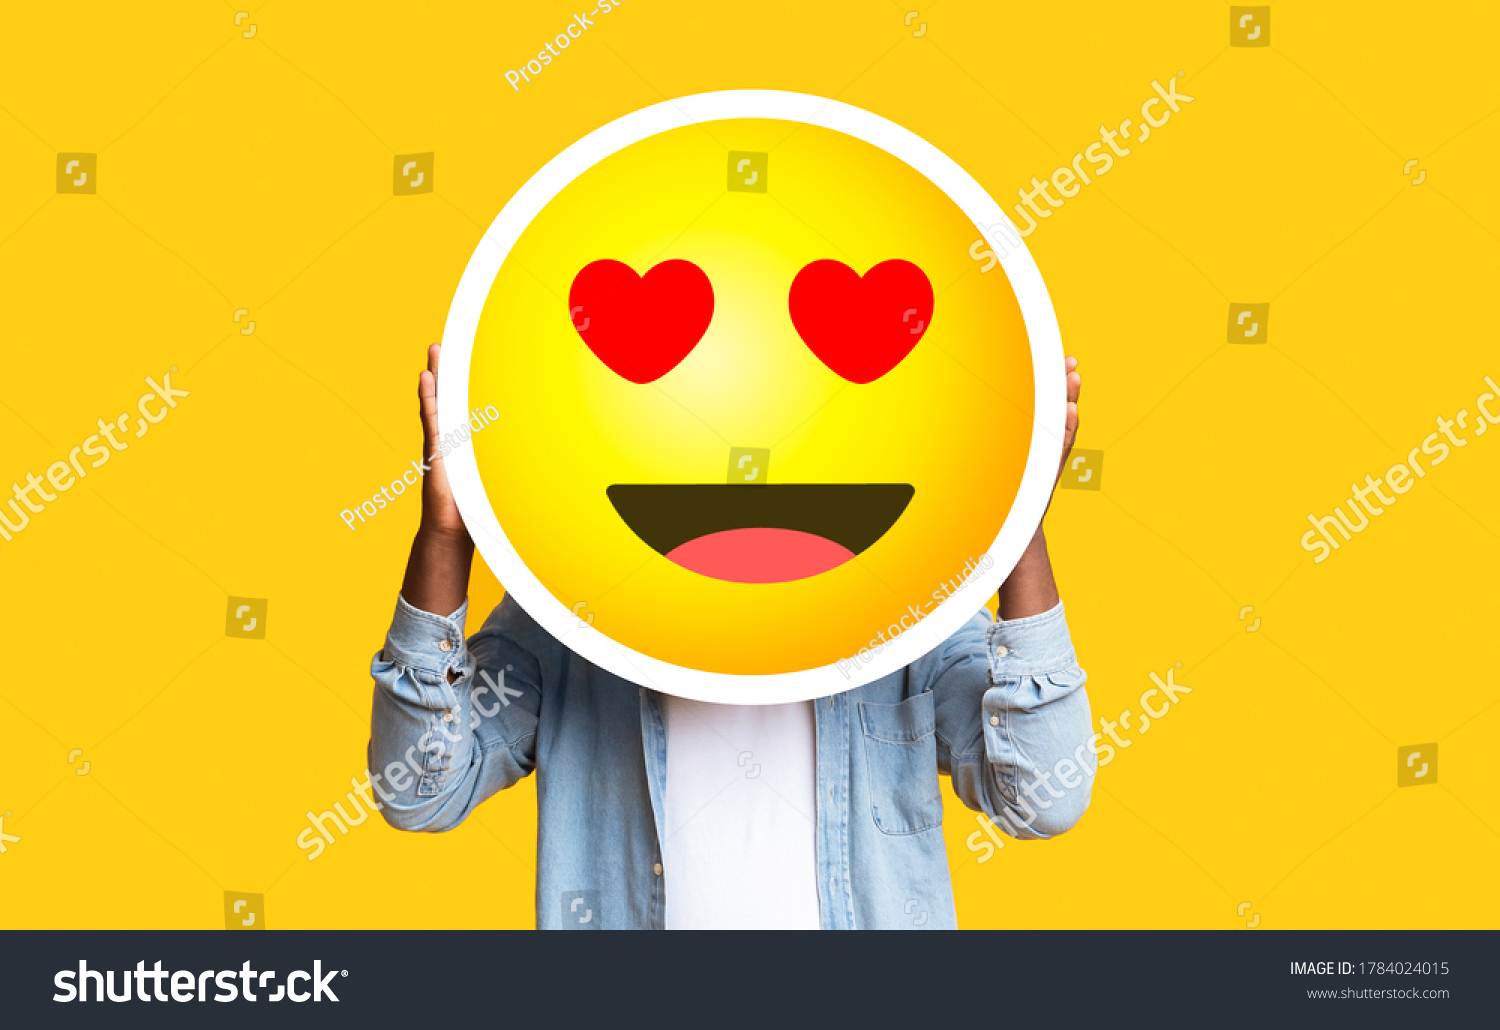 I Love Emoji. Unrecognizable Black Man Hiding Face Against Romantic Emoticon Sticker, Standing Over Yellow Background With Free Space #1784024015